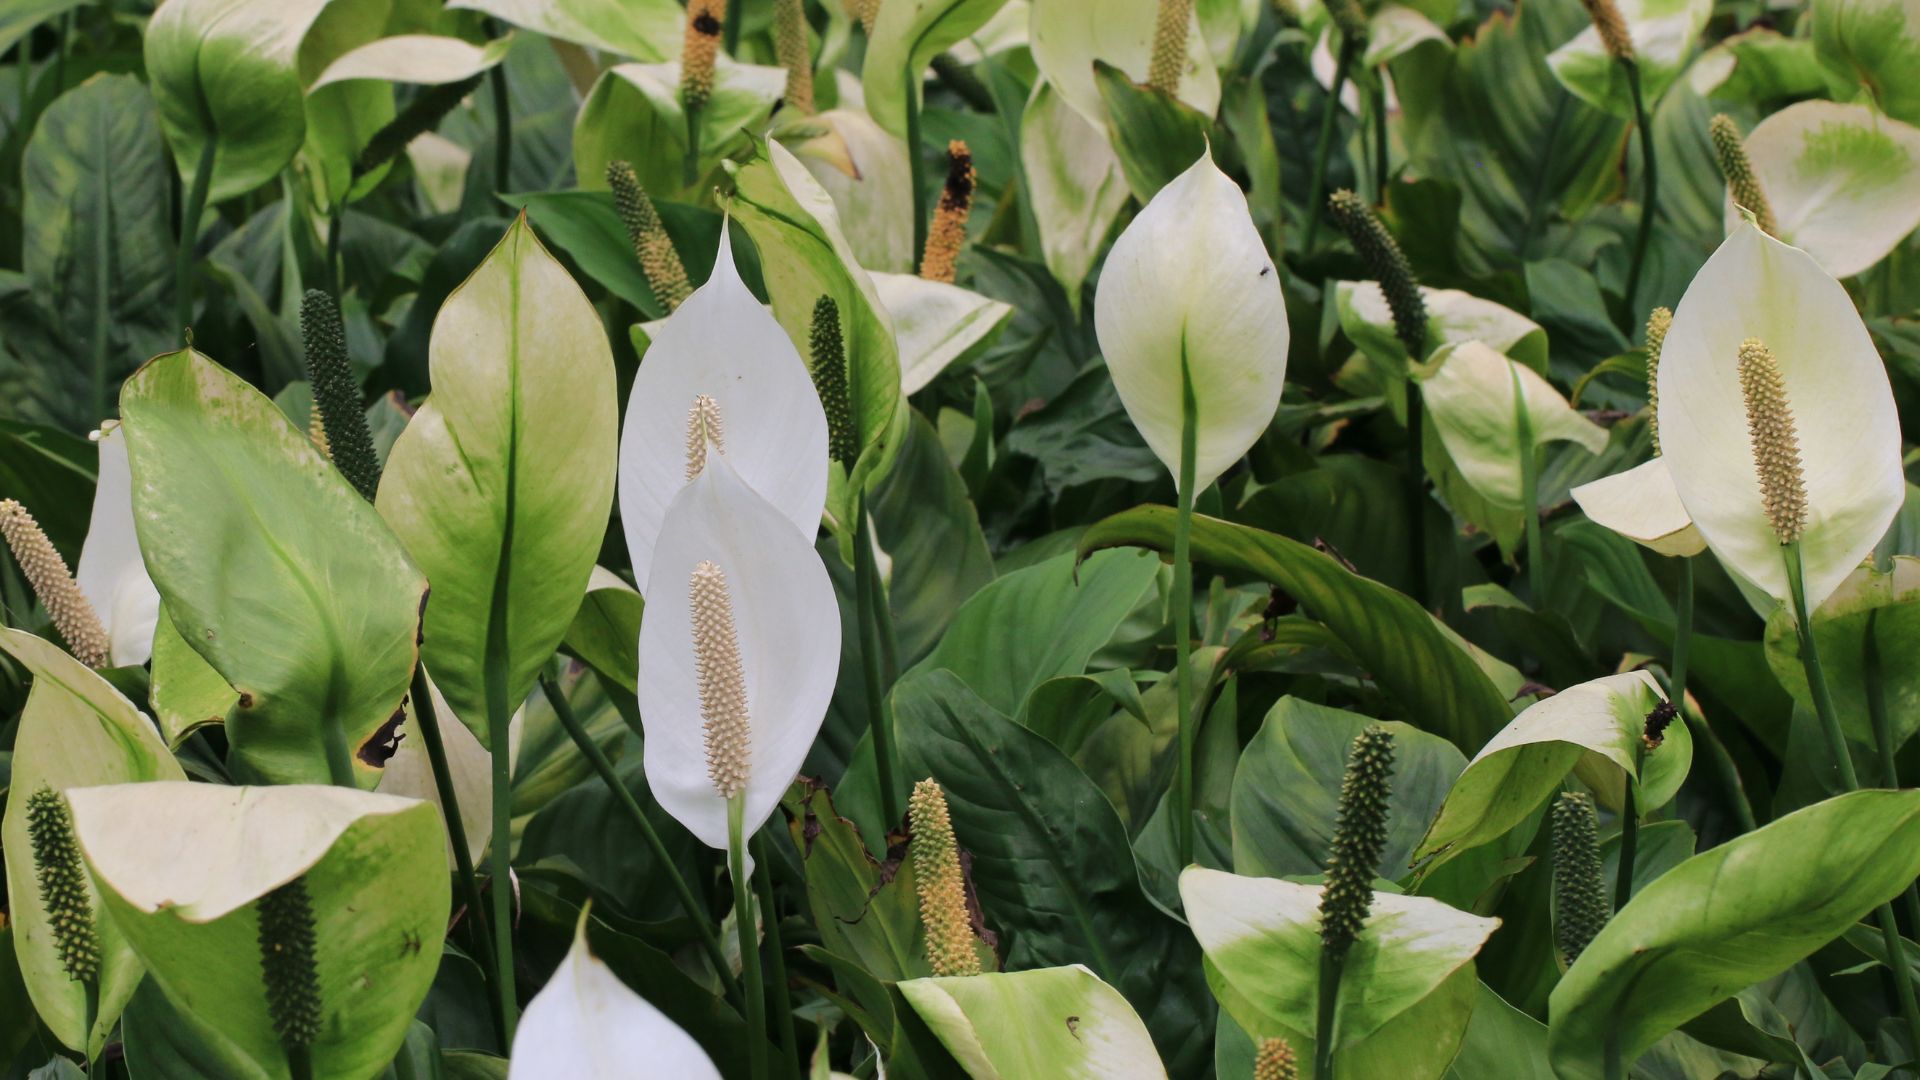 How To Get More Peace Lily Flowers From A Single Plant